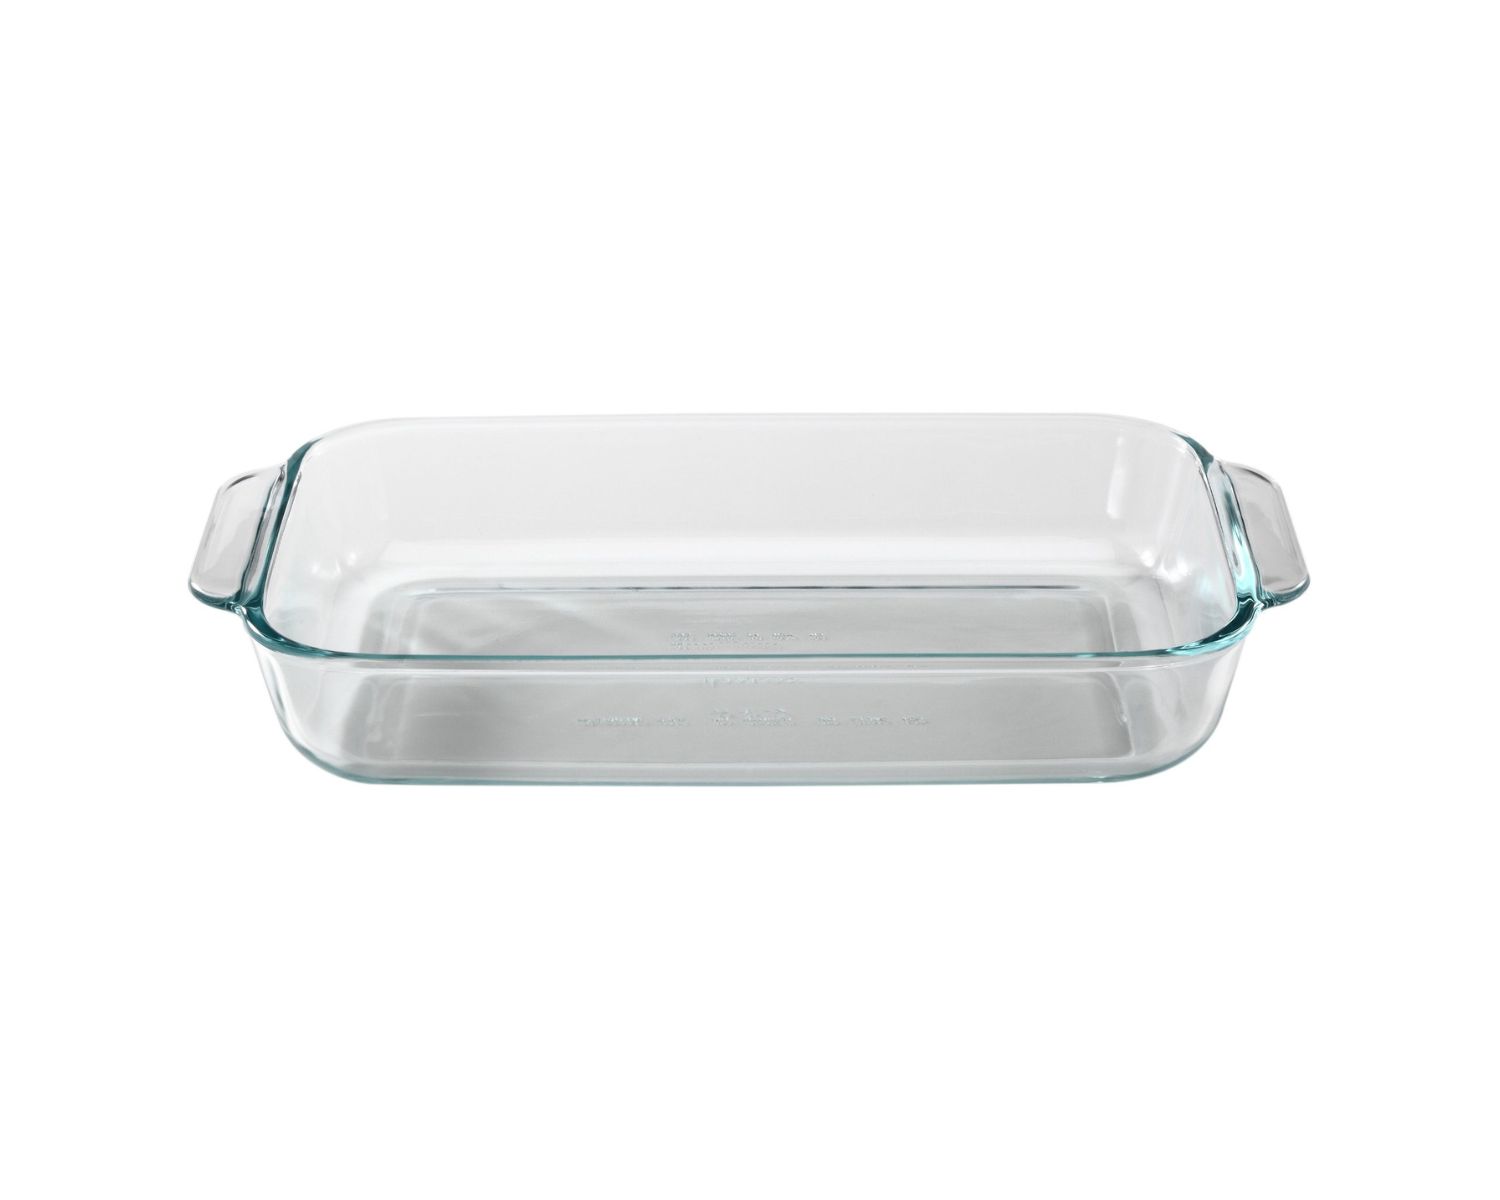 Baking Dish Review: The Perfect Kitchen Essential